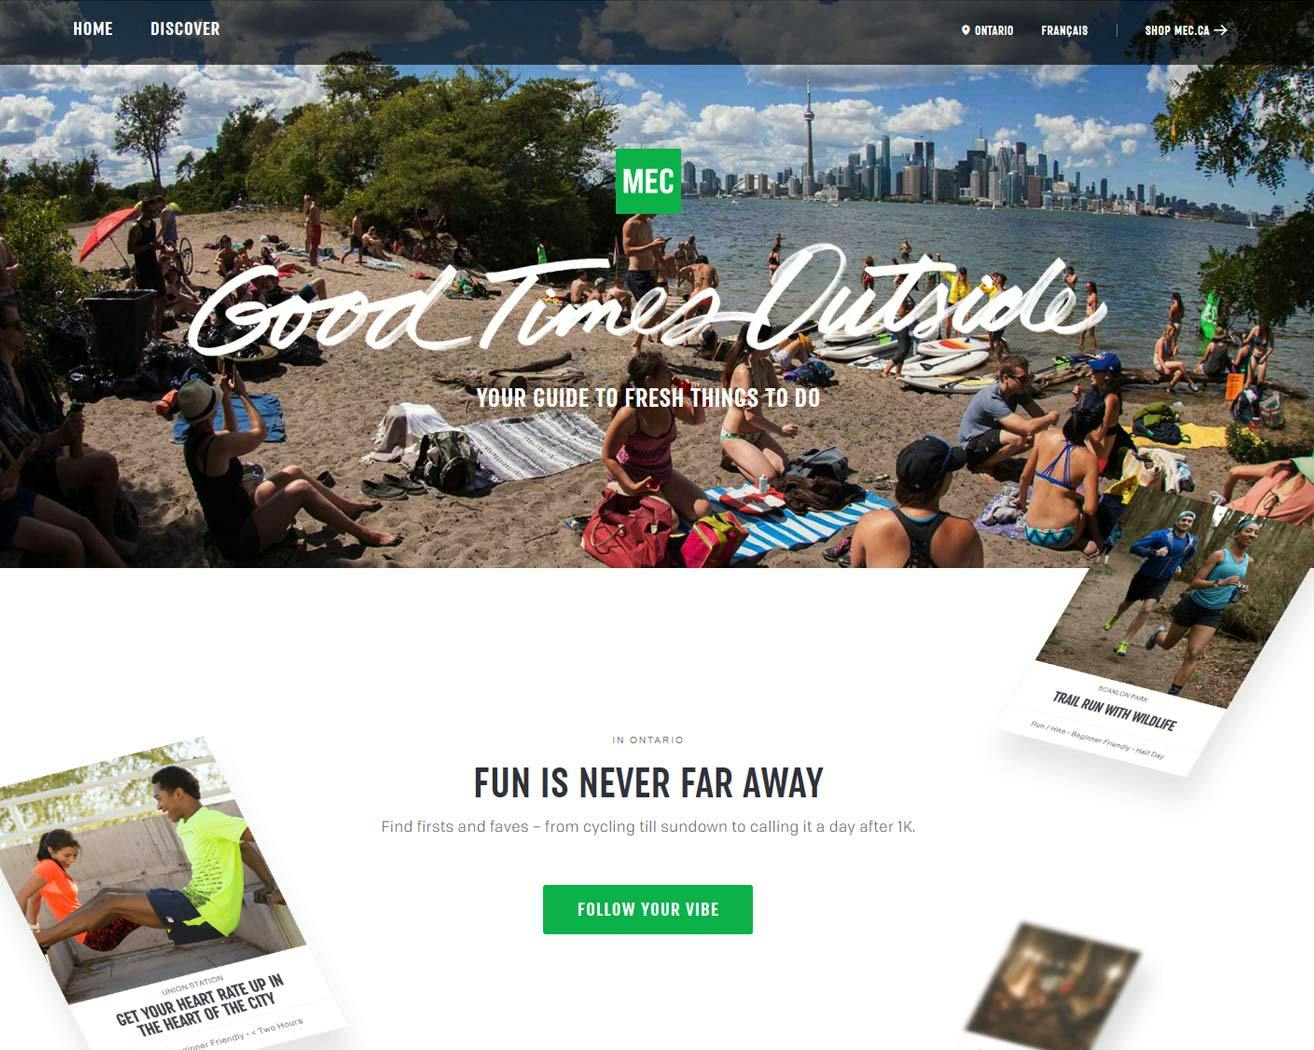 Screenshot showing the Good Times Outside website.